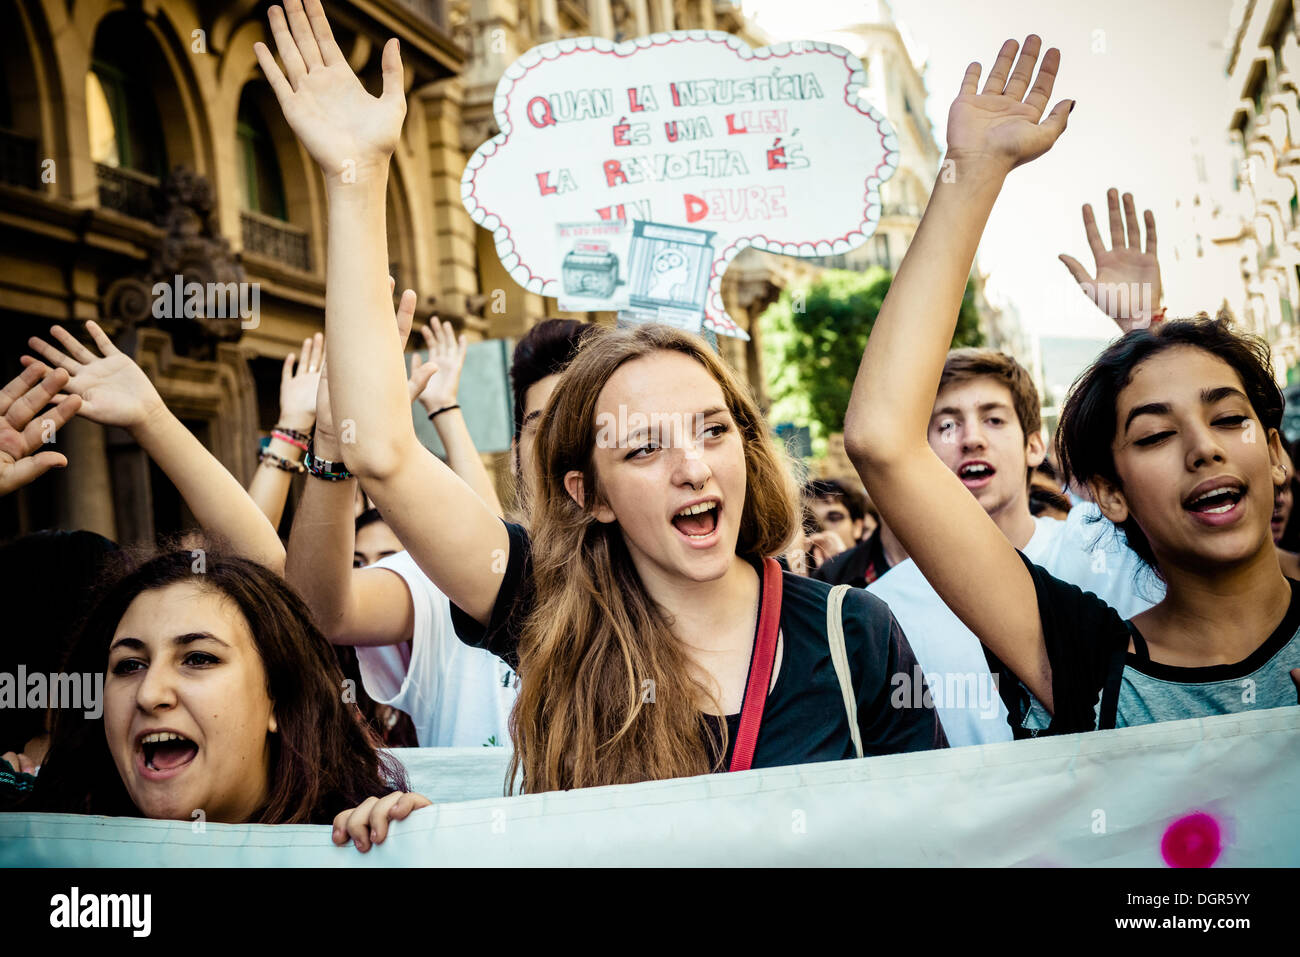 Barcelona, Spain. October 24th, 2013: Students behind their banner shout slogans to protest austerity measures and the 'law Wert' during a three day long education strike in Barcelona. © matthi/Alamy Live News Stock Photo